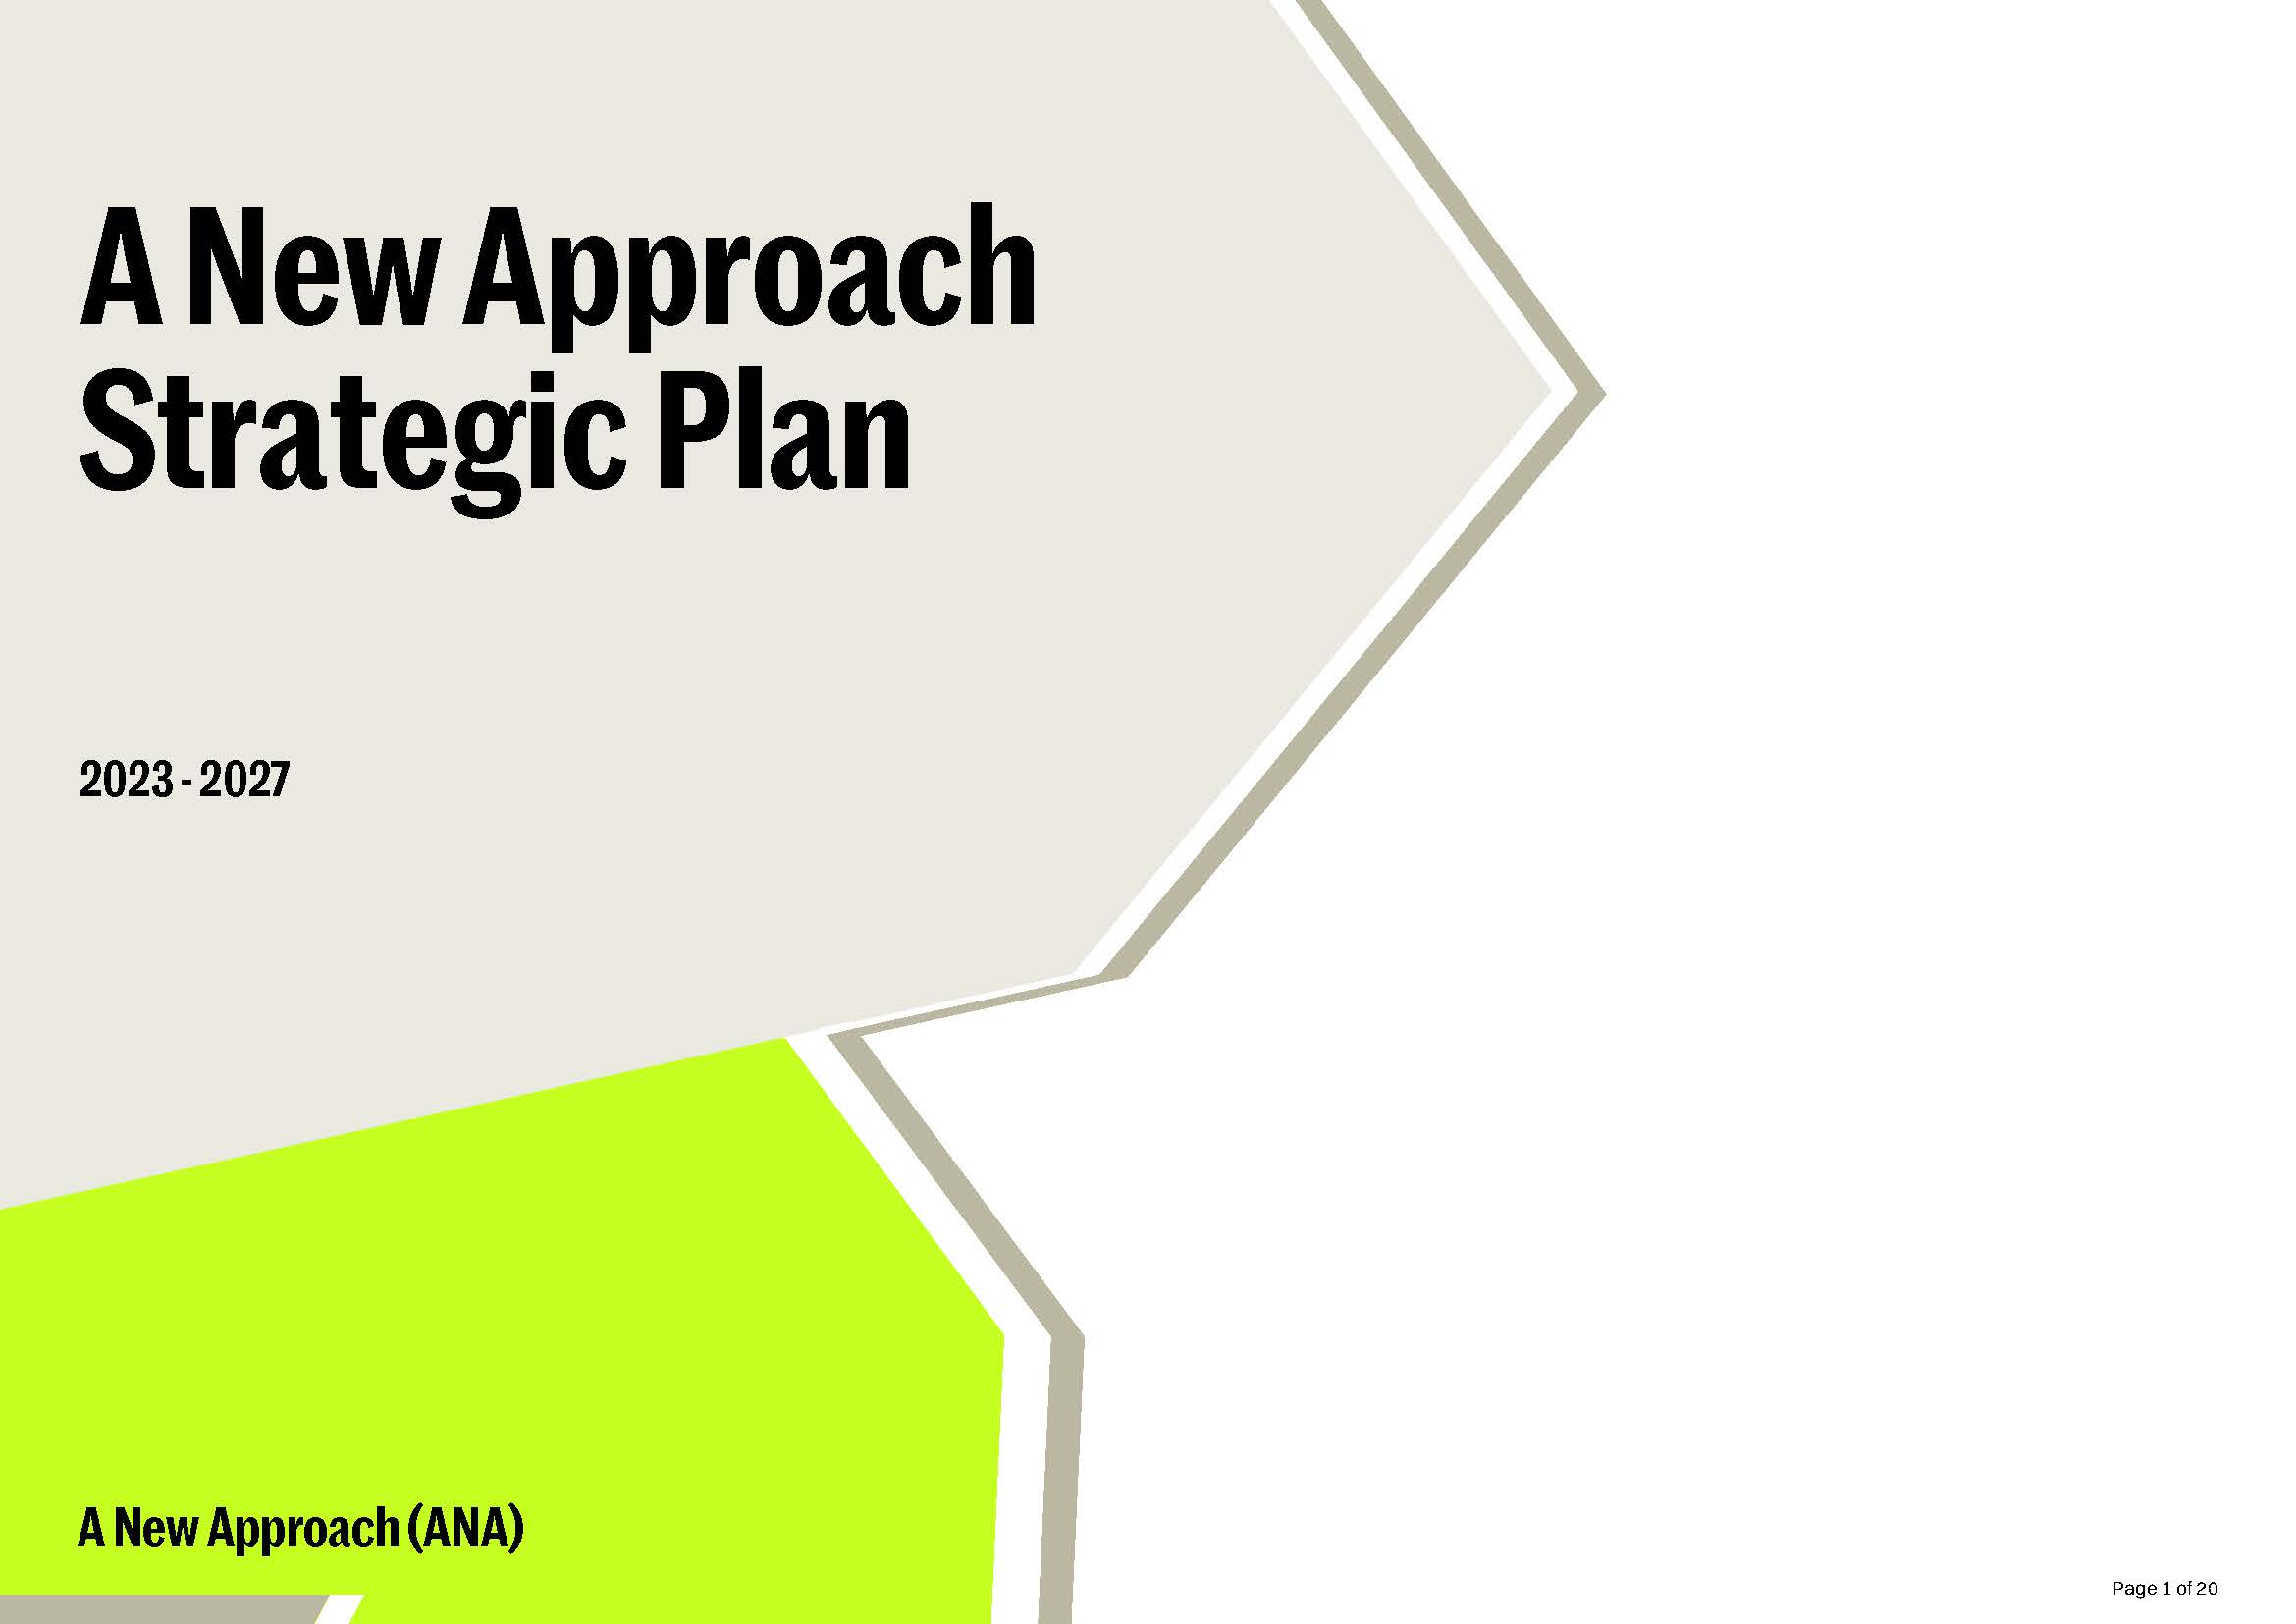 Cover page for ANA's strategic plan. Has two gem shaped blocks in green and grey with the words 'A New Approach Strategic Plan 2023 - 2027' on one, and 'A New Approach (ANA)' on the other